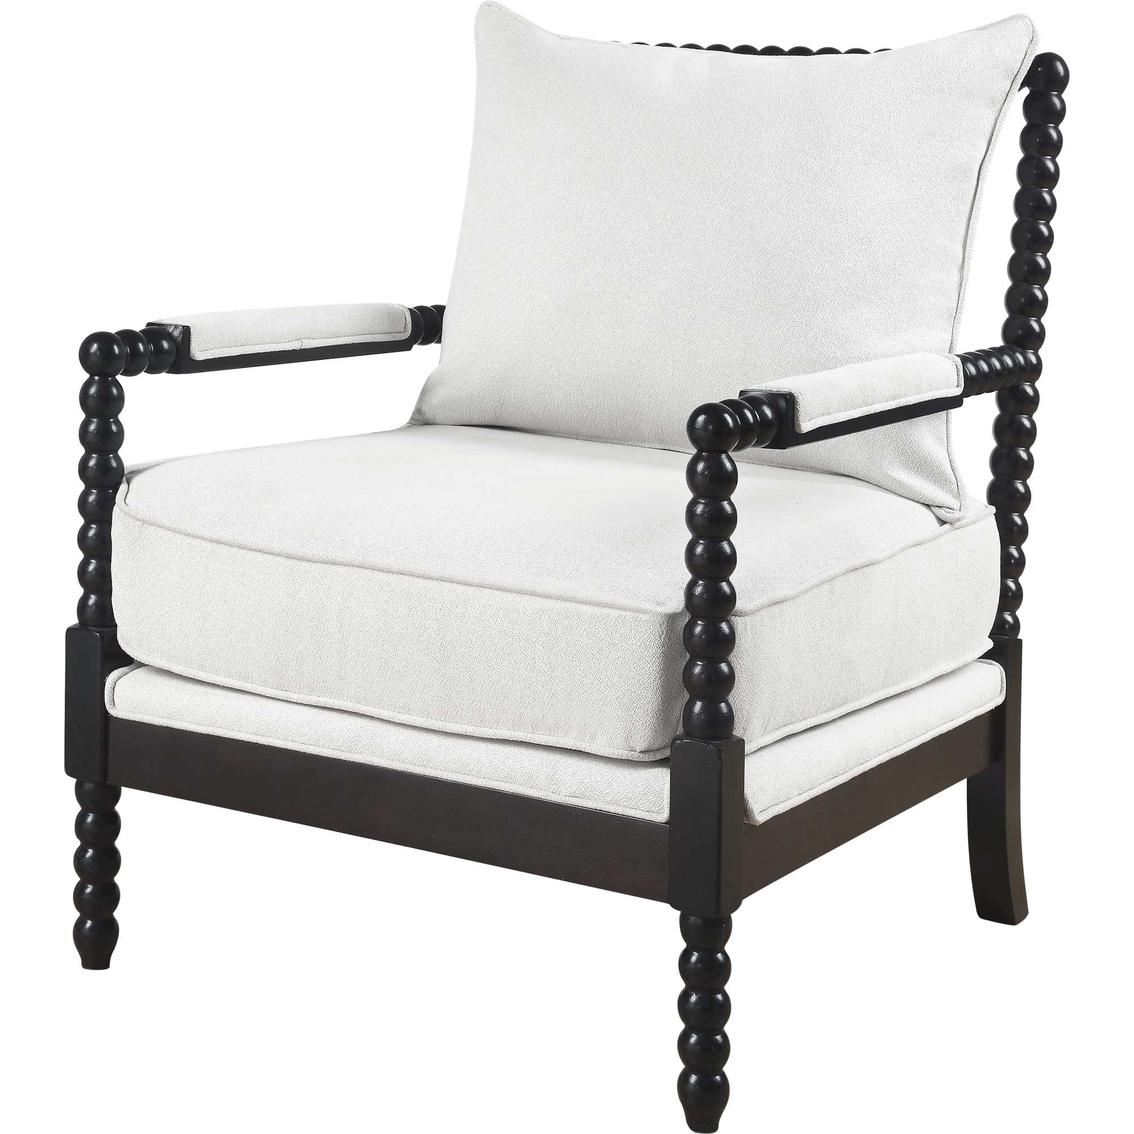 Coast to Coast Accents Accent Chair - Image 2 of 4